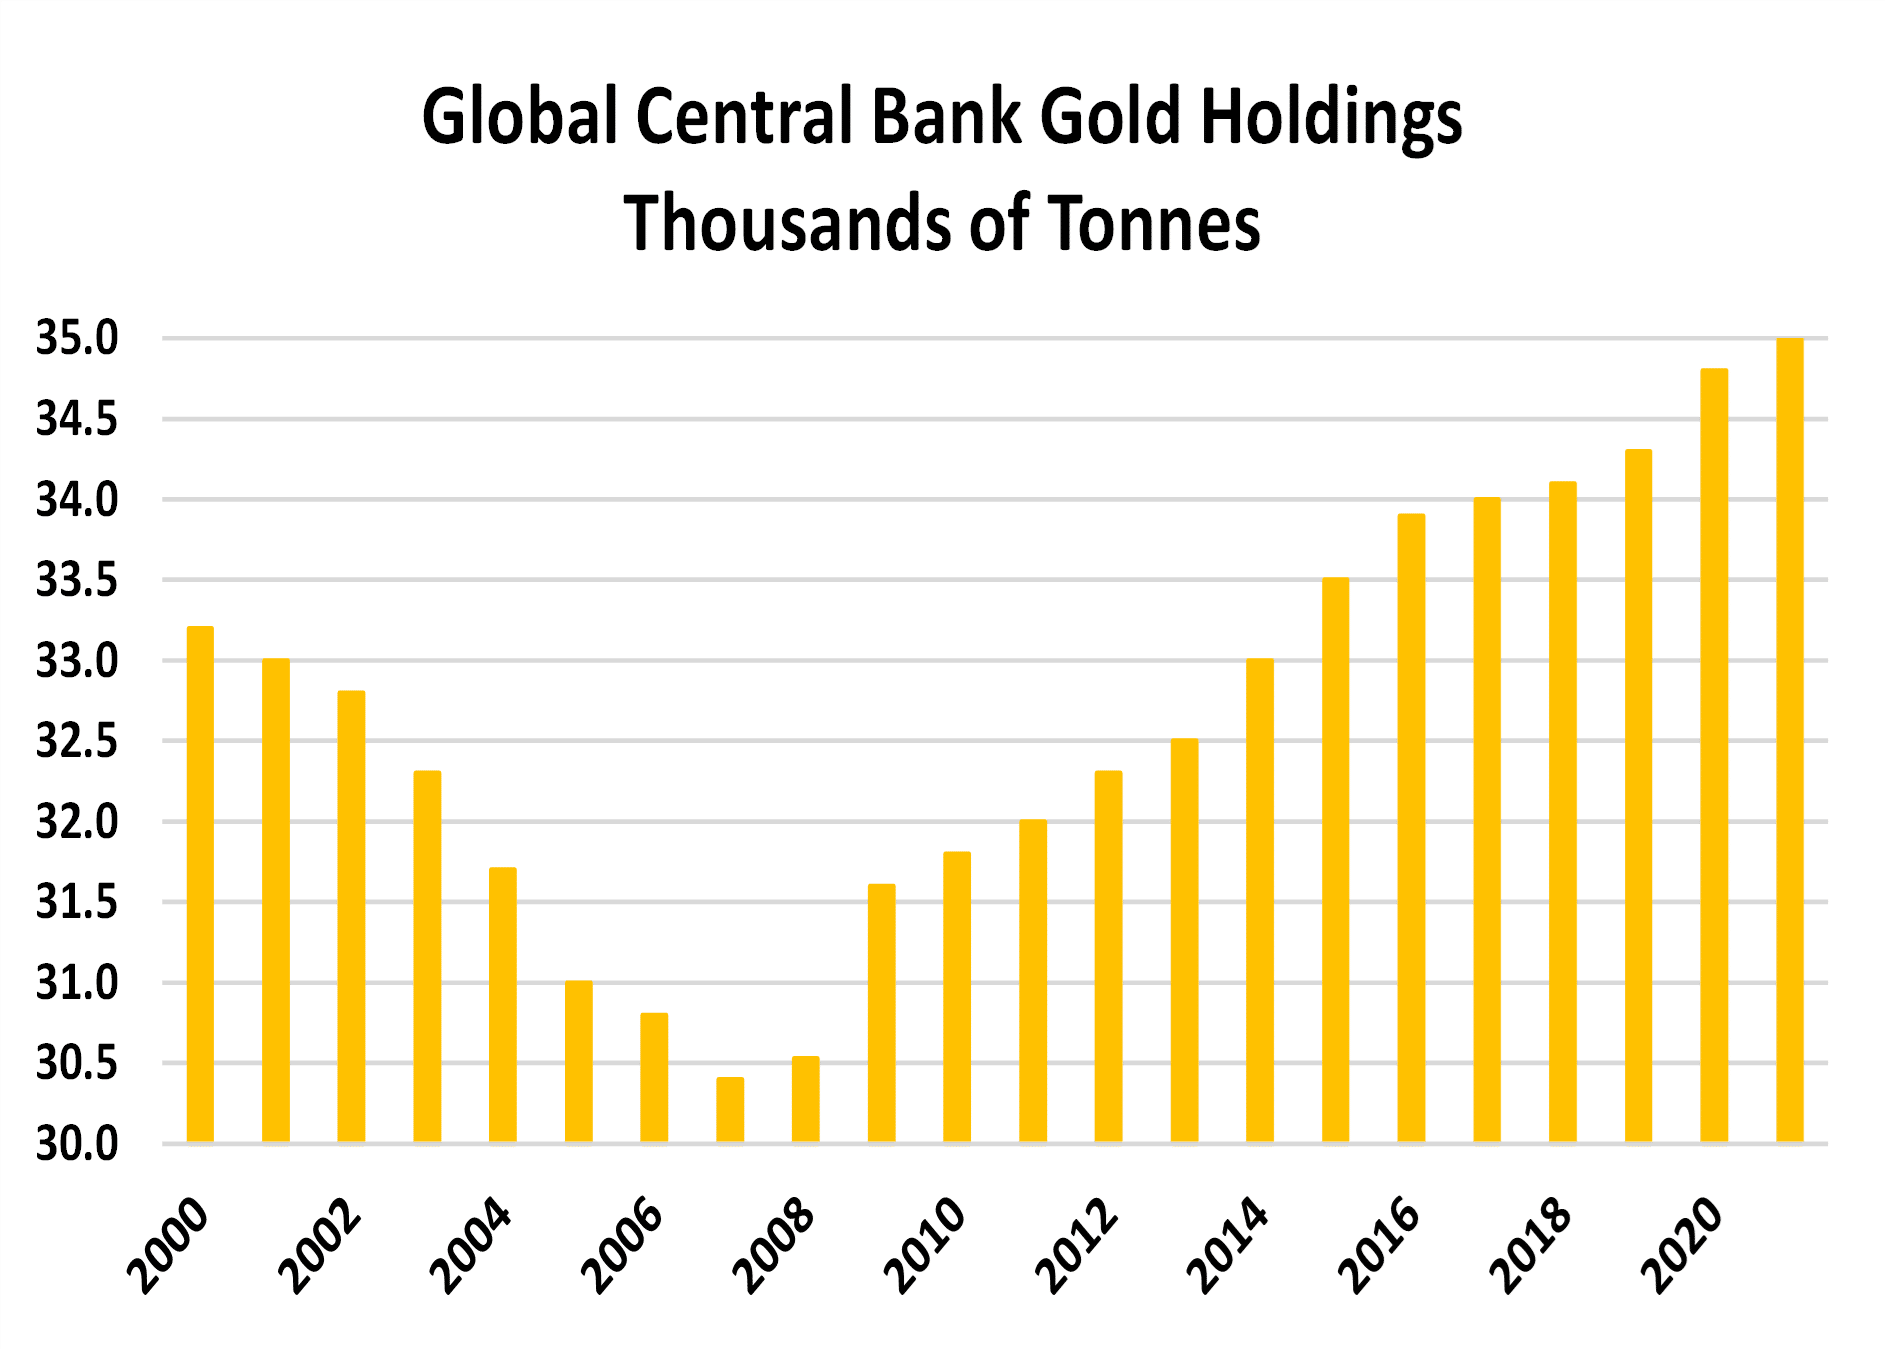 Global Central Bank Gold Holdings - Thousands of Tonnes